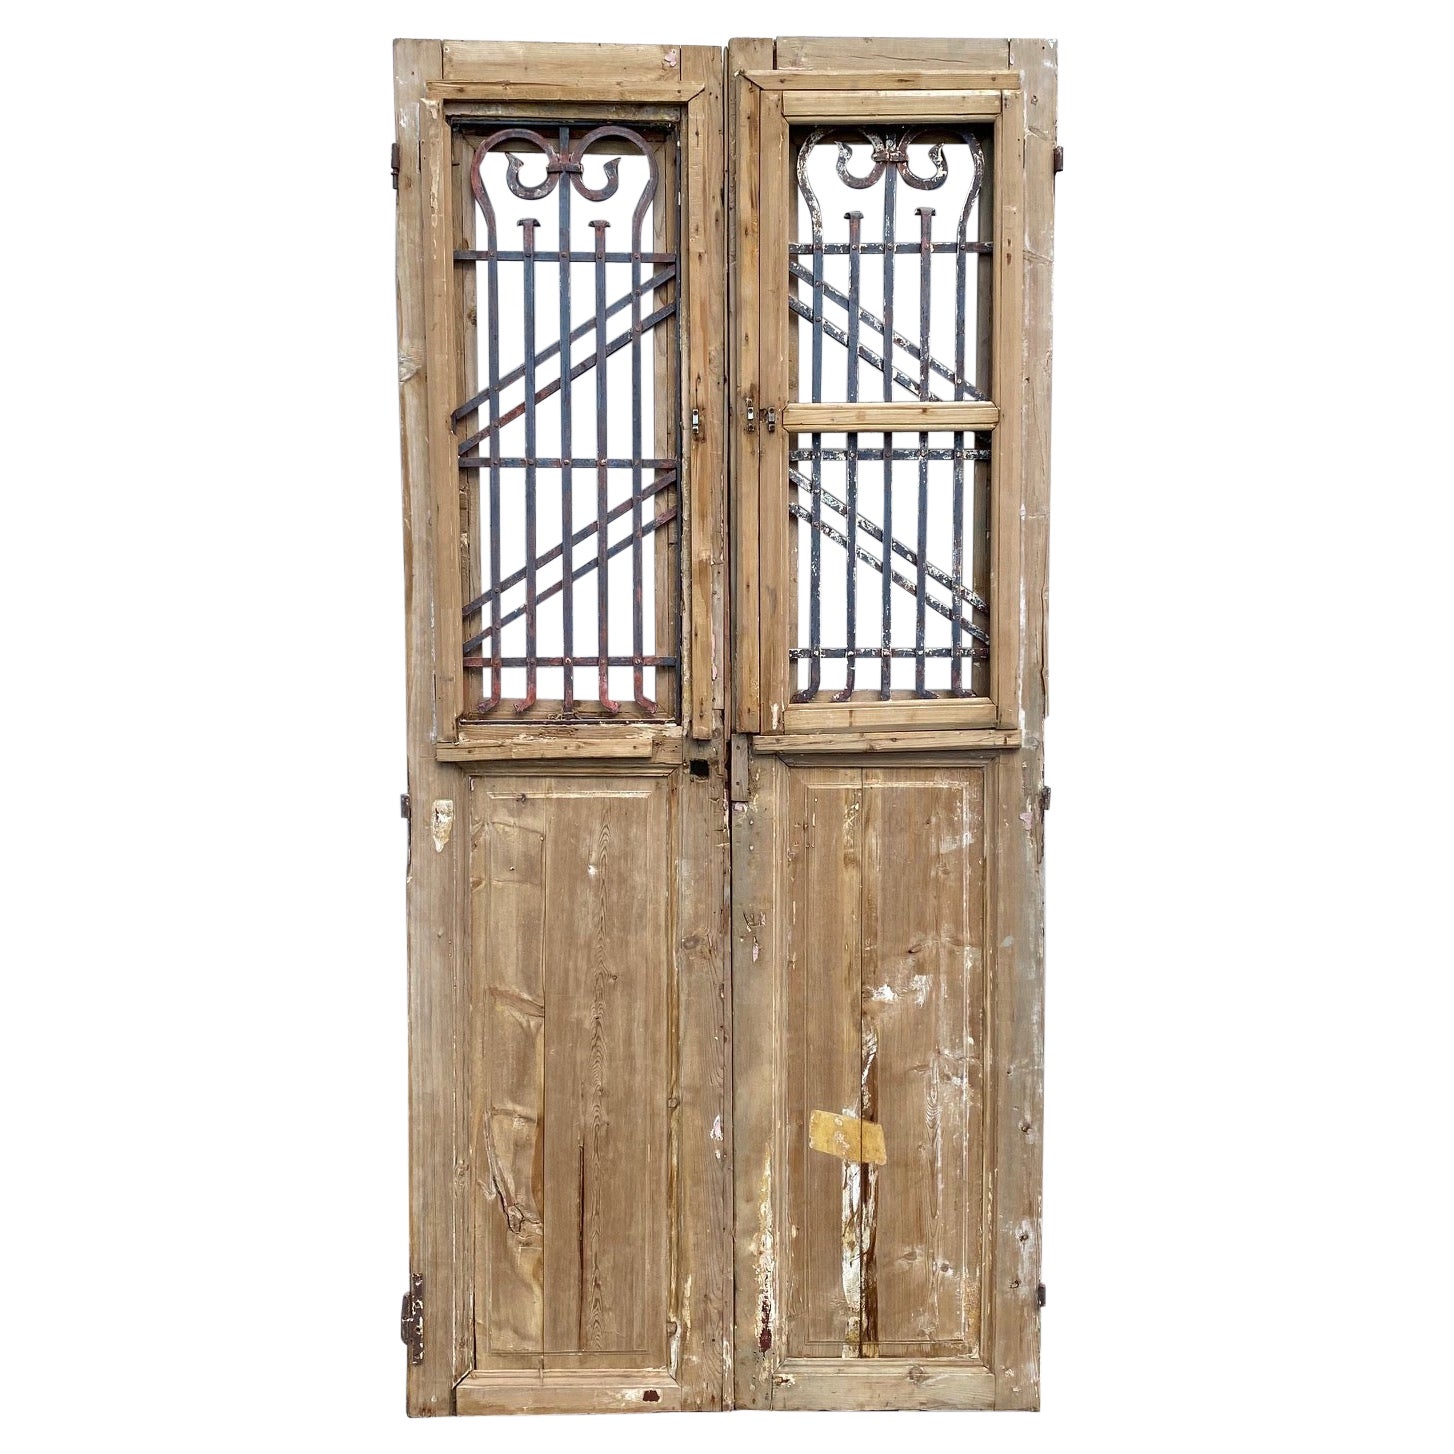 Pair of 19th Century French Paneled Doors with Intricate Wrought Iron Panels For Sale